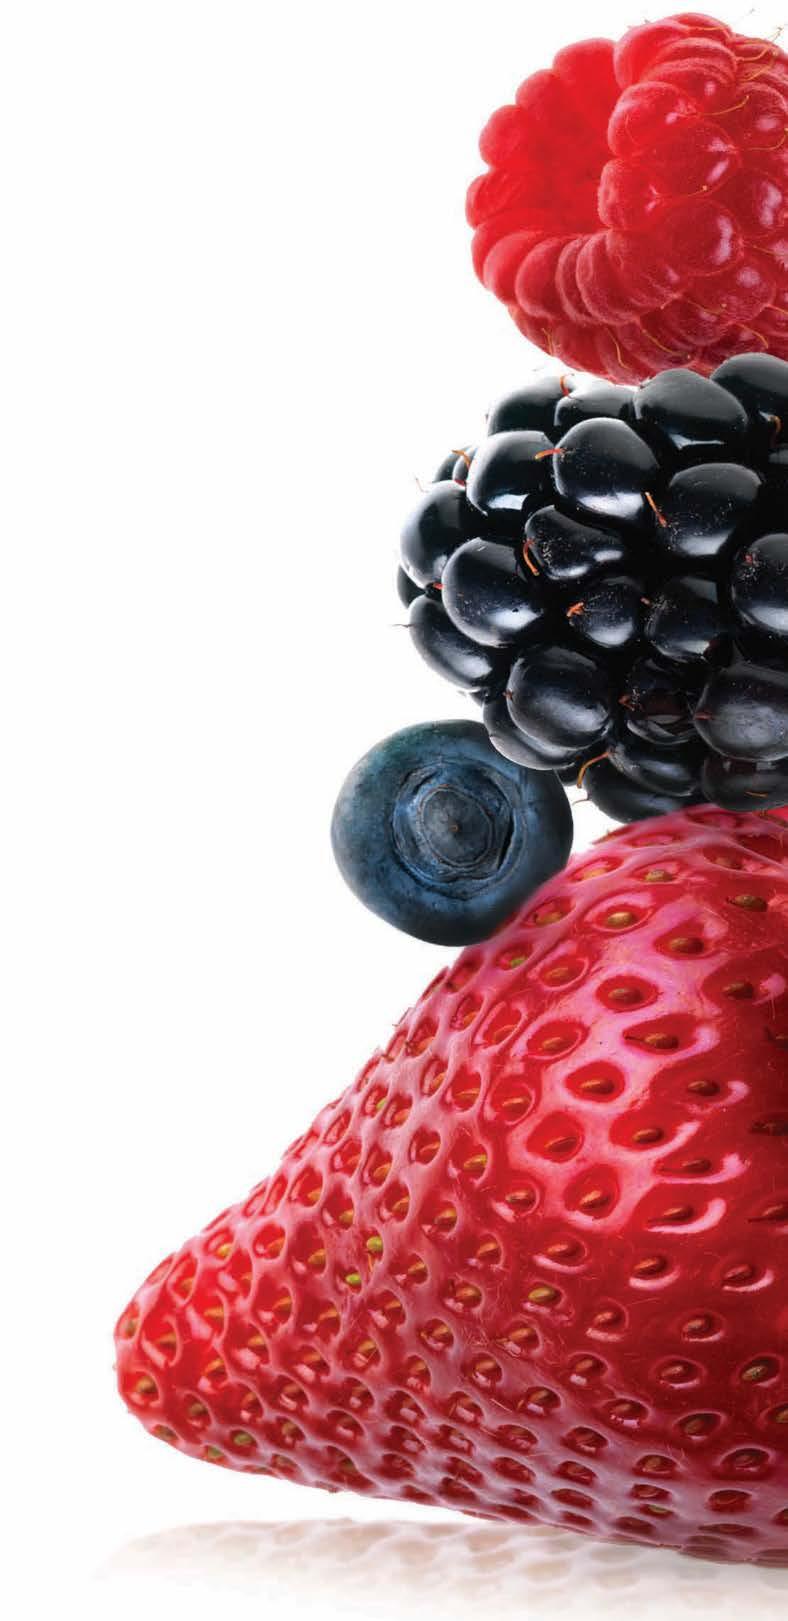 WE ARE A TOTAL BERRY SOLUTION Naturipe delivers very unique advantages: Partner with Growers Global leader in production, sales and marketing Conventional and Organics